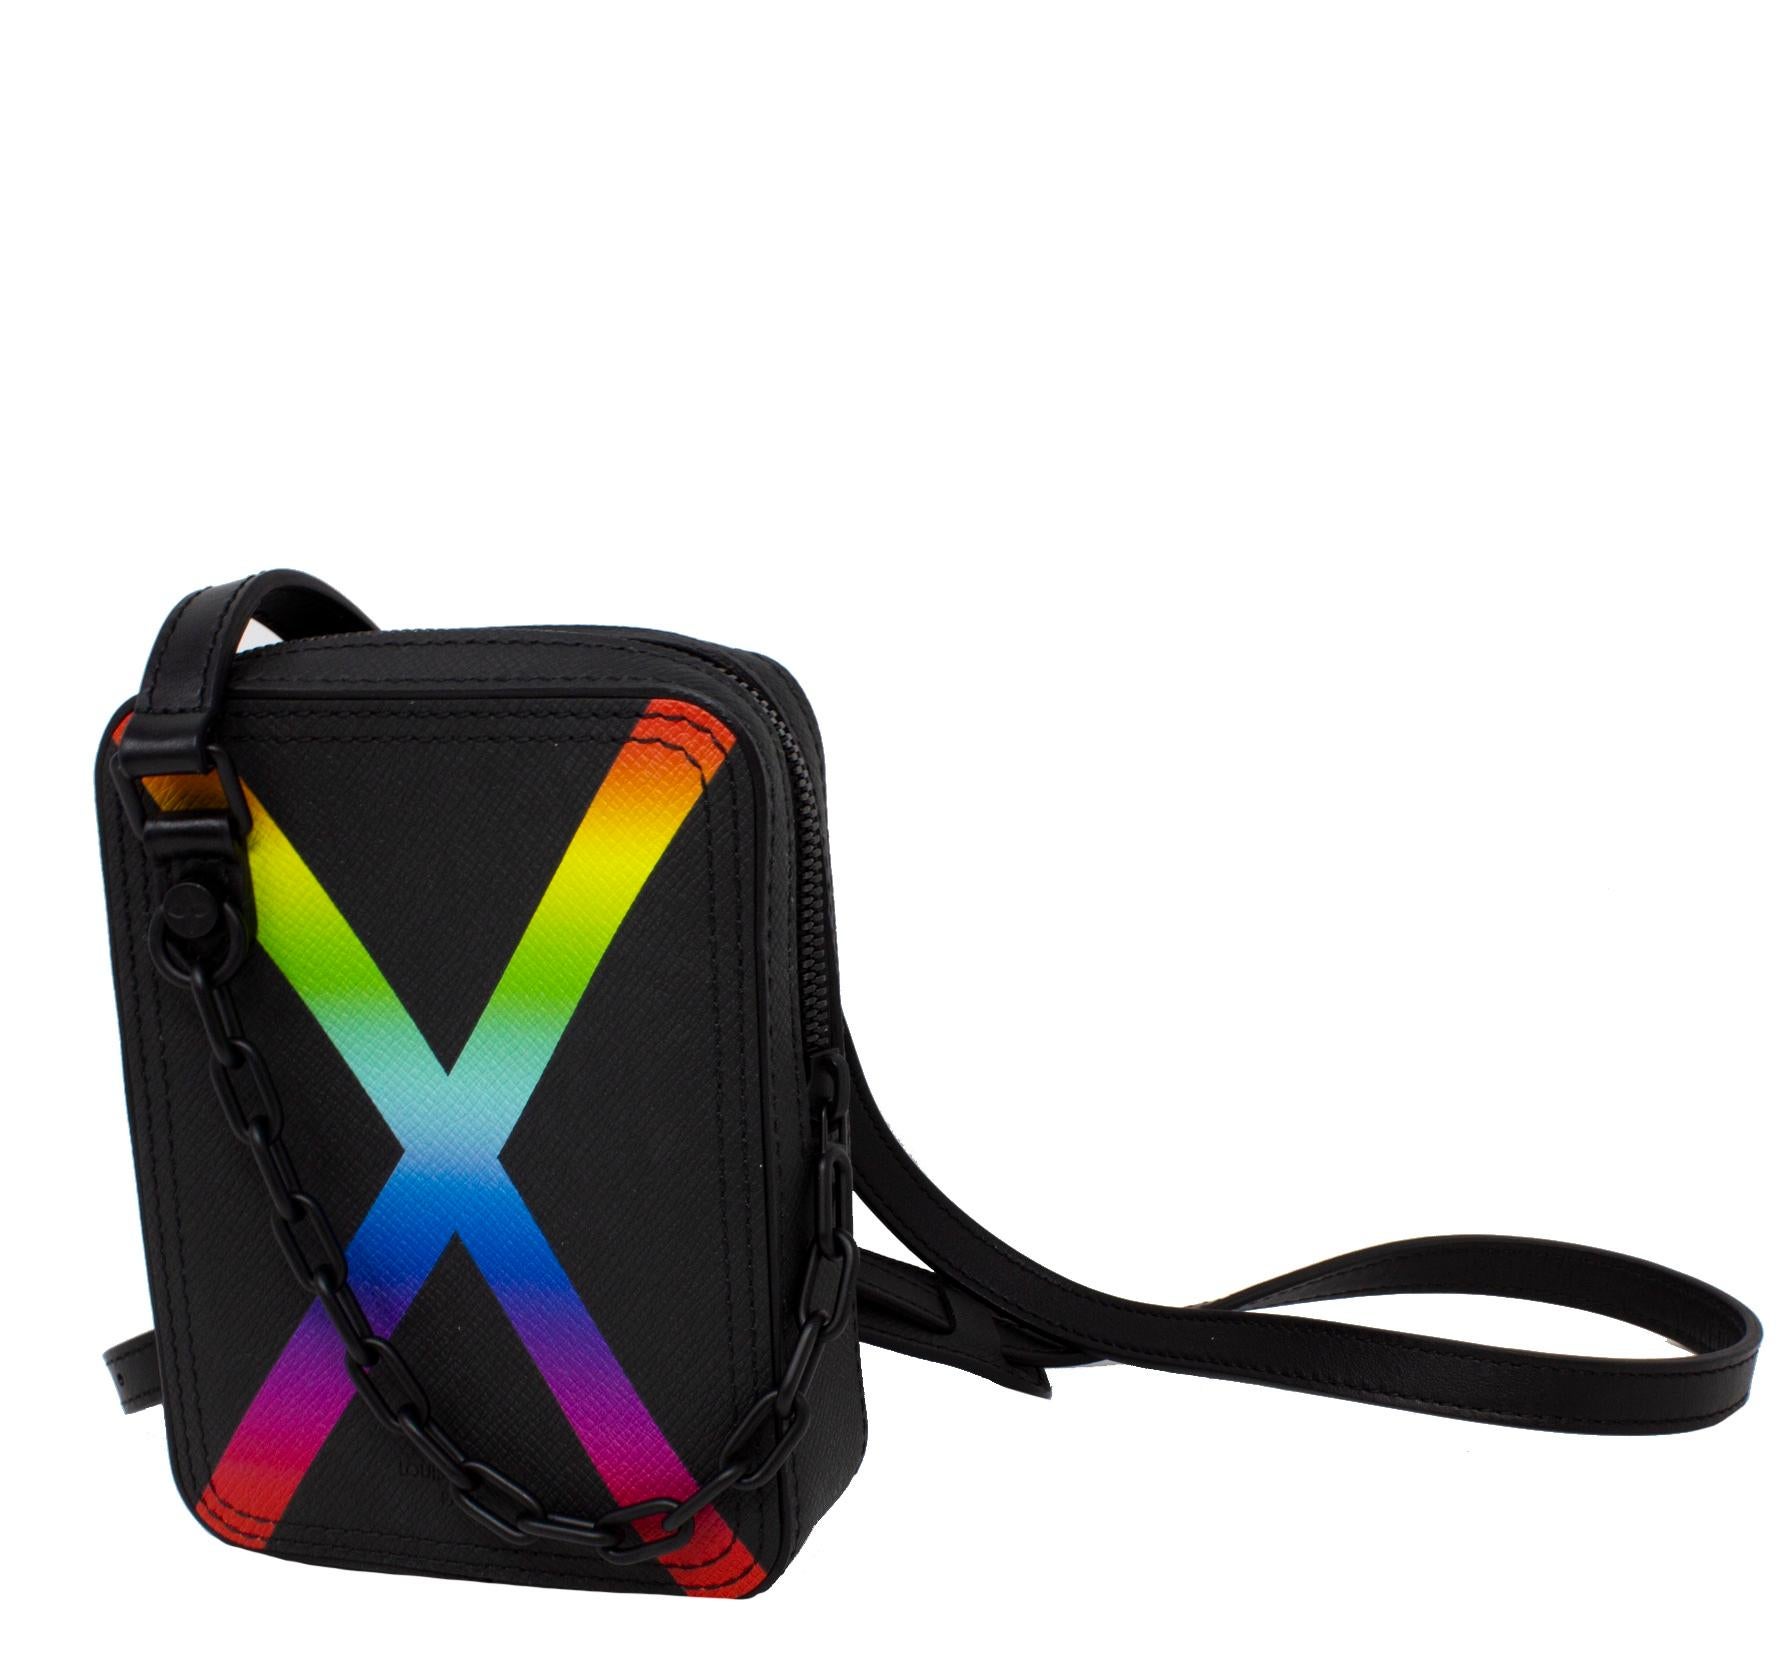 Super fun interpretation of the classic Danube silhouette by Virgil Abloh. This Louis Vuitton Messenger Bag is crafted in black grained leather with a graphic rainbow print and edgy black tonal hardware. The zip closure is connected to a black chain